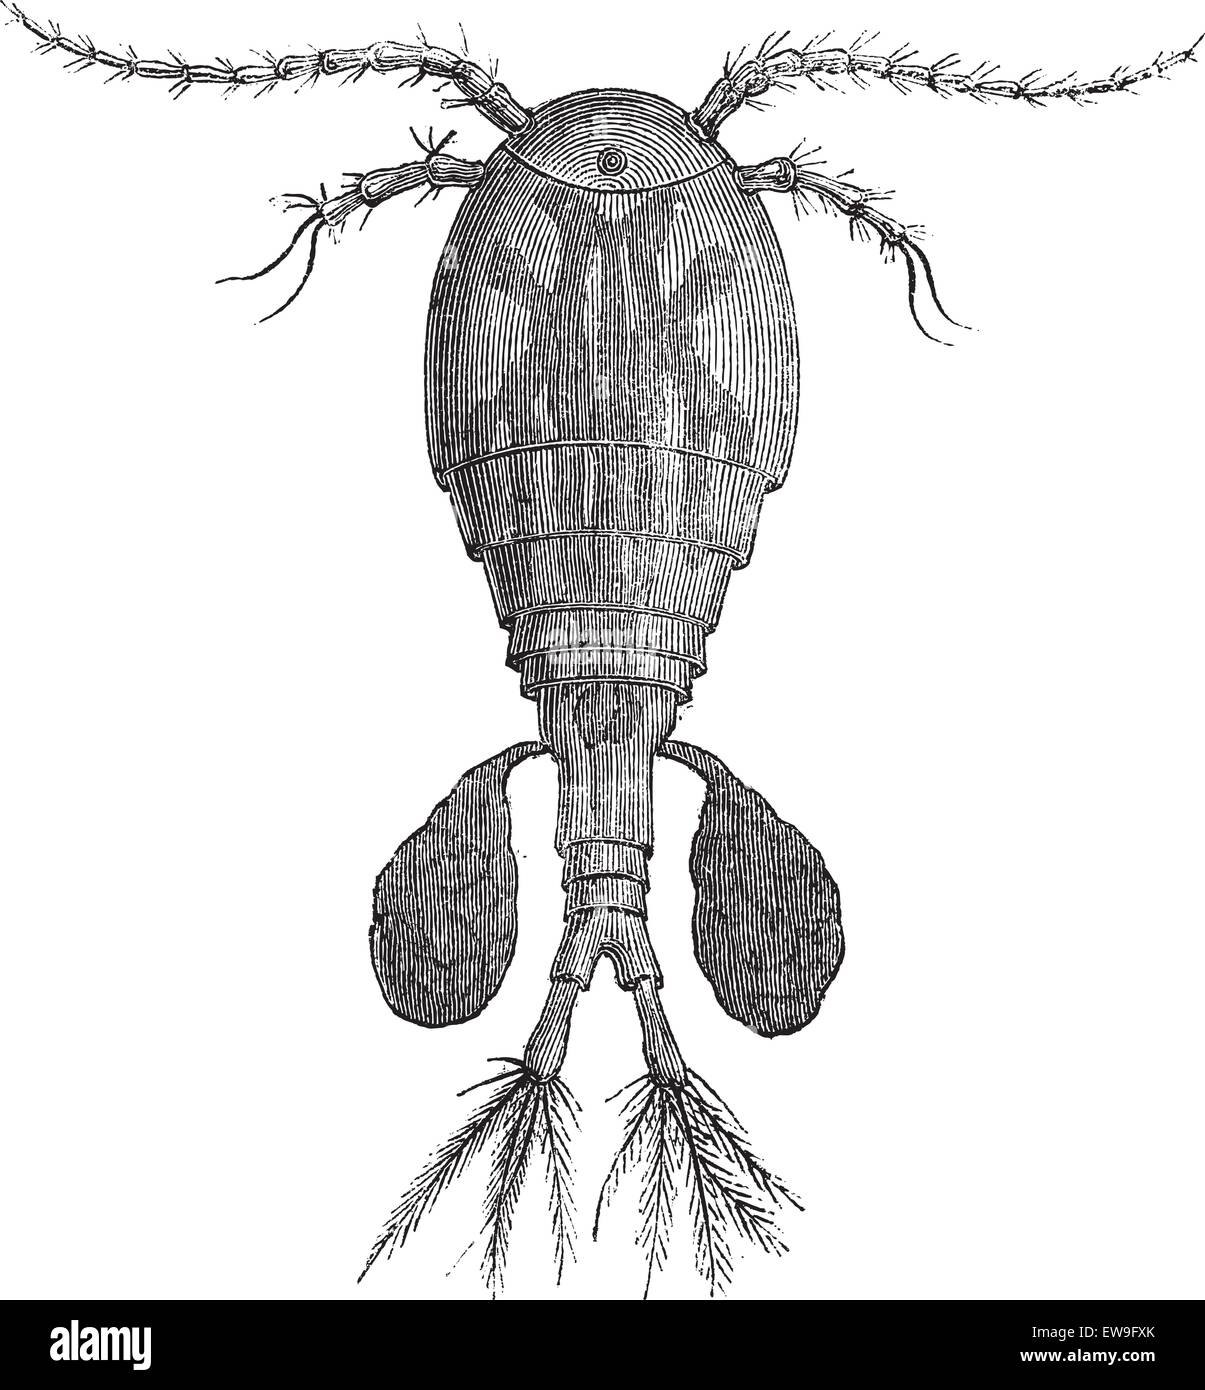 Freshwater Copepod or Cyclops sp., vintage engraved illustration. Le Magasin Pittoresque - Larive and Fleury - 1874 Stock Vector